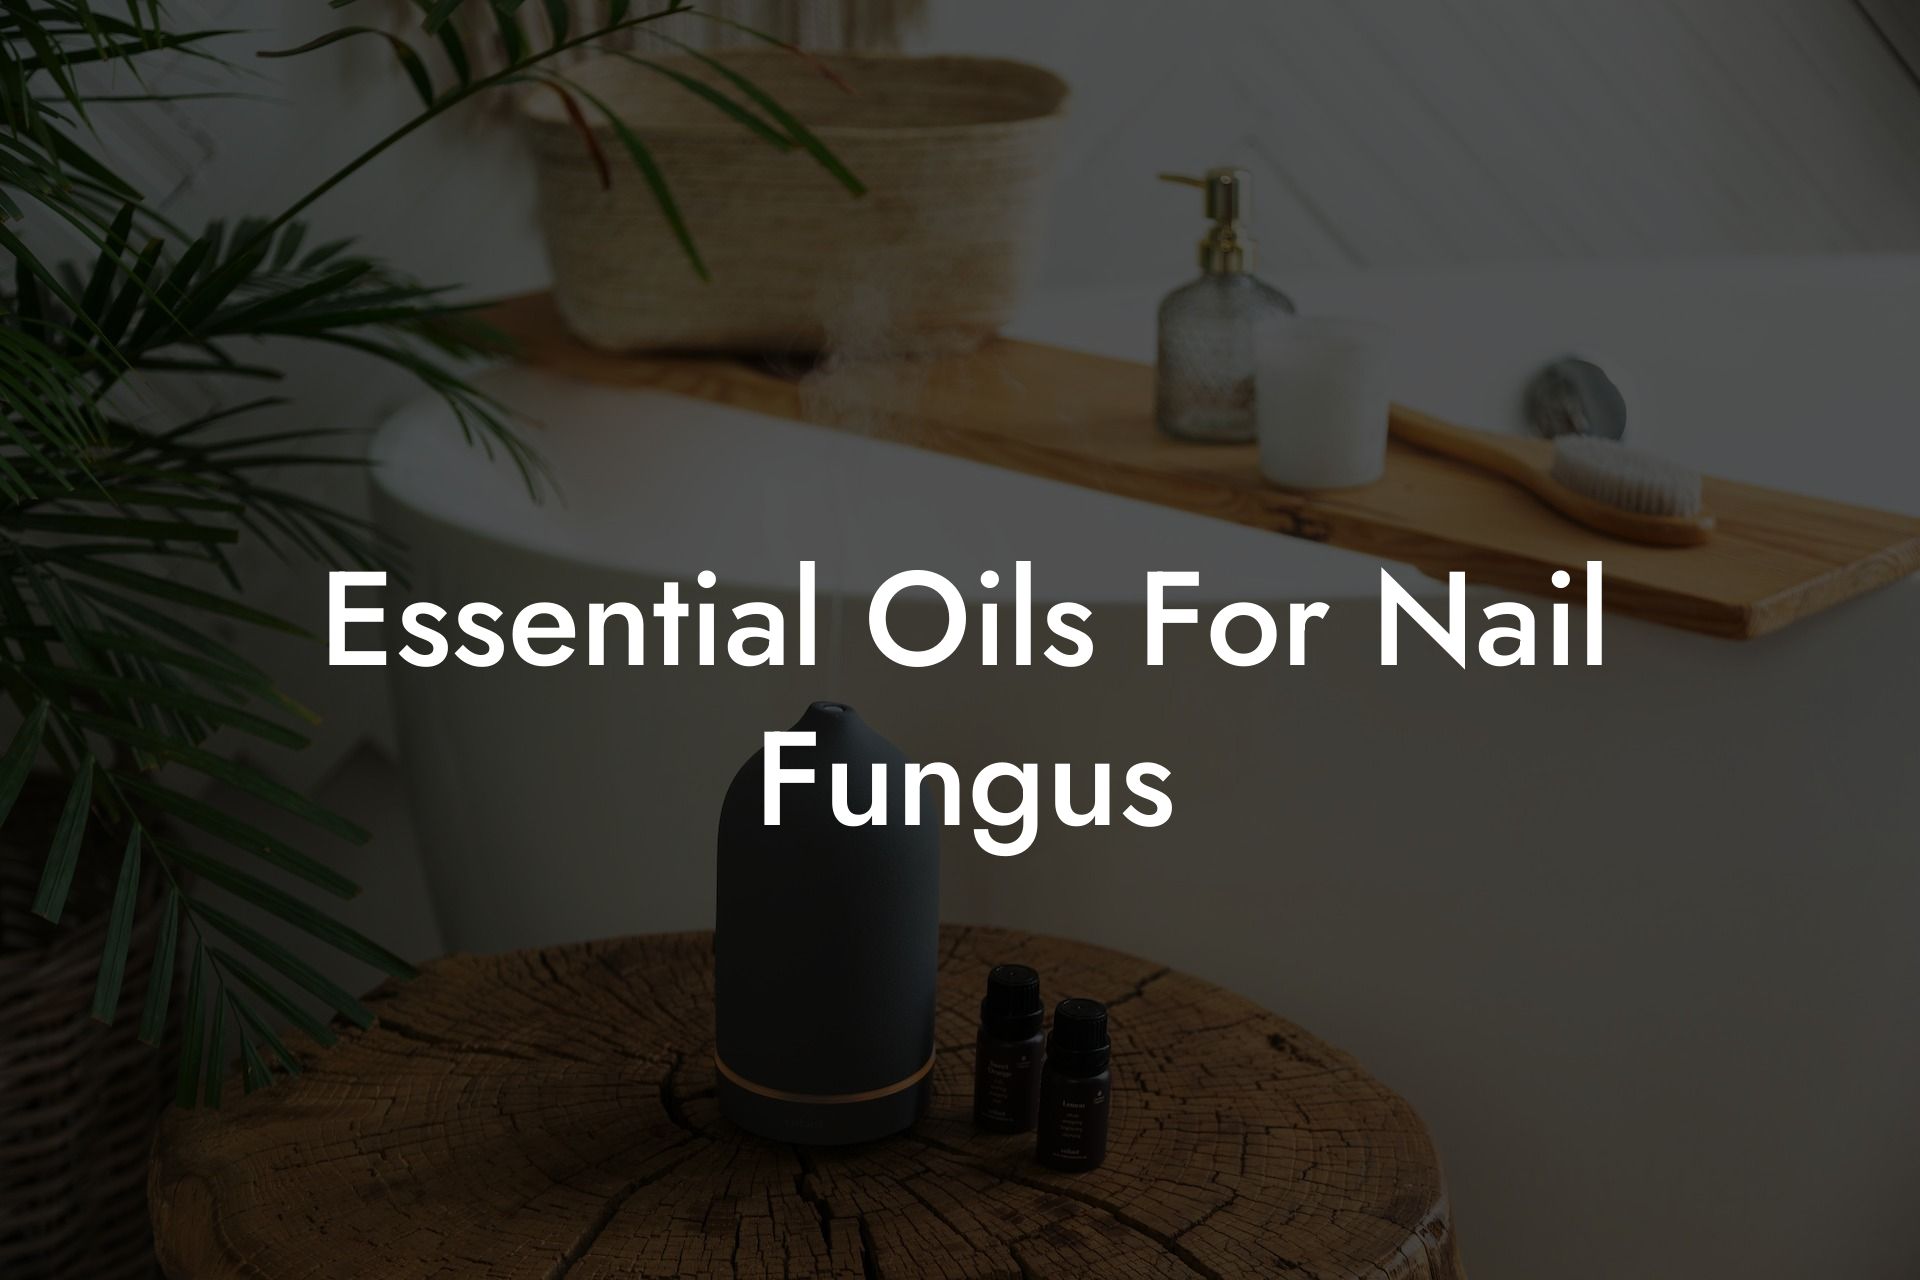 Essential Oils For Nail Fungus